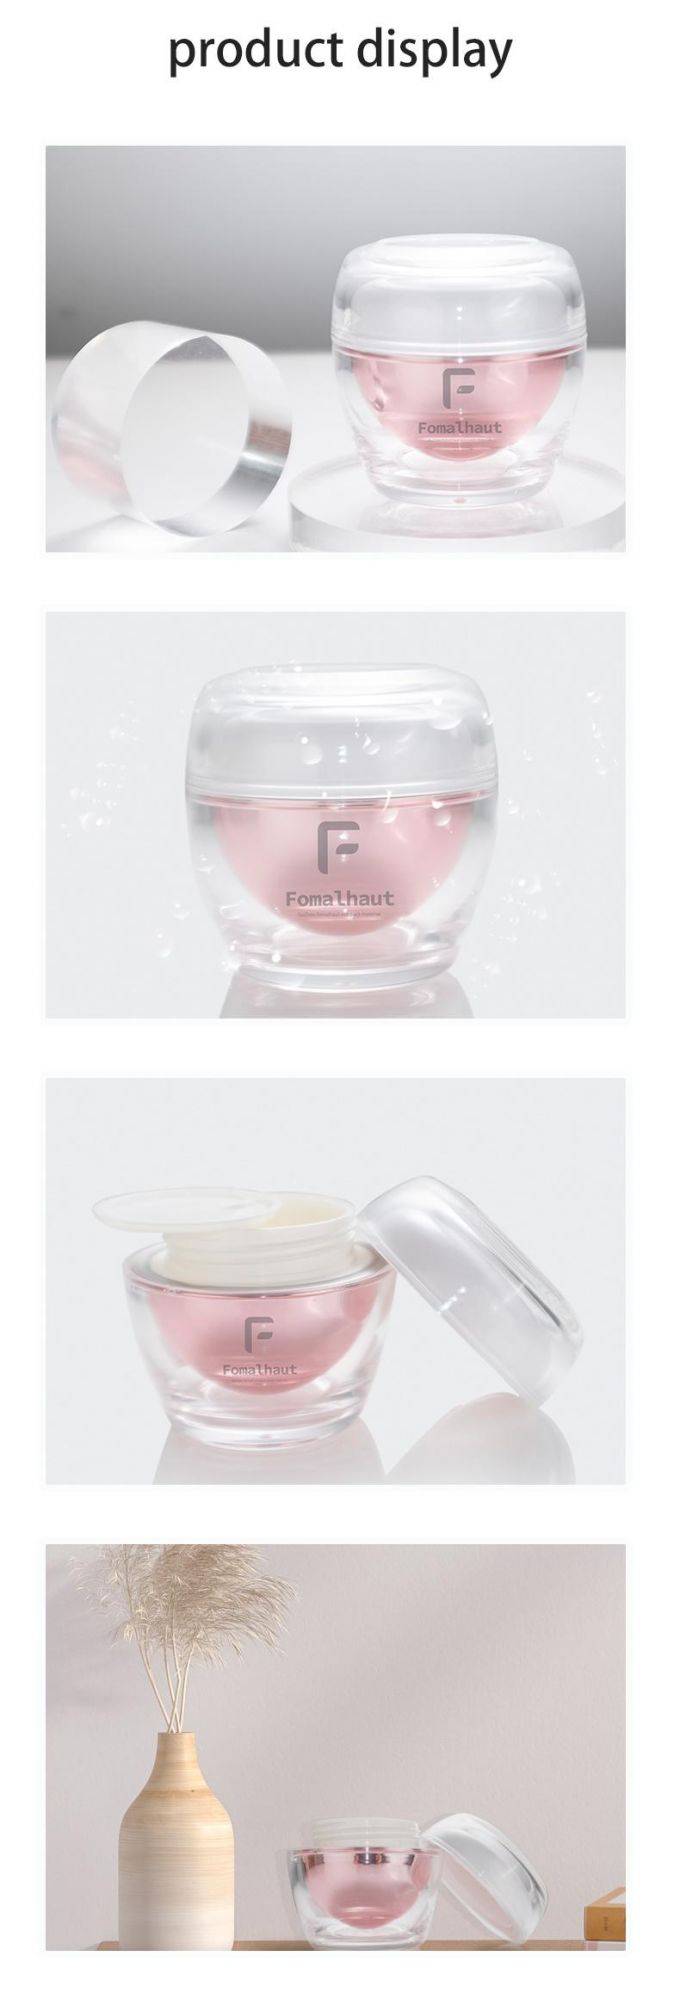 Fomalhaut Cosmetic Container as PMMA High-End Plastic Cream Jar